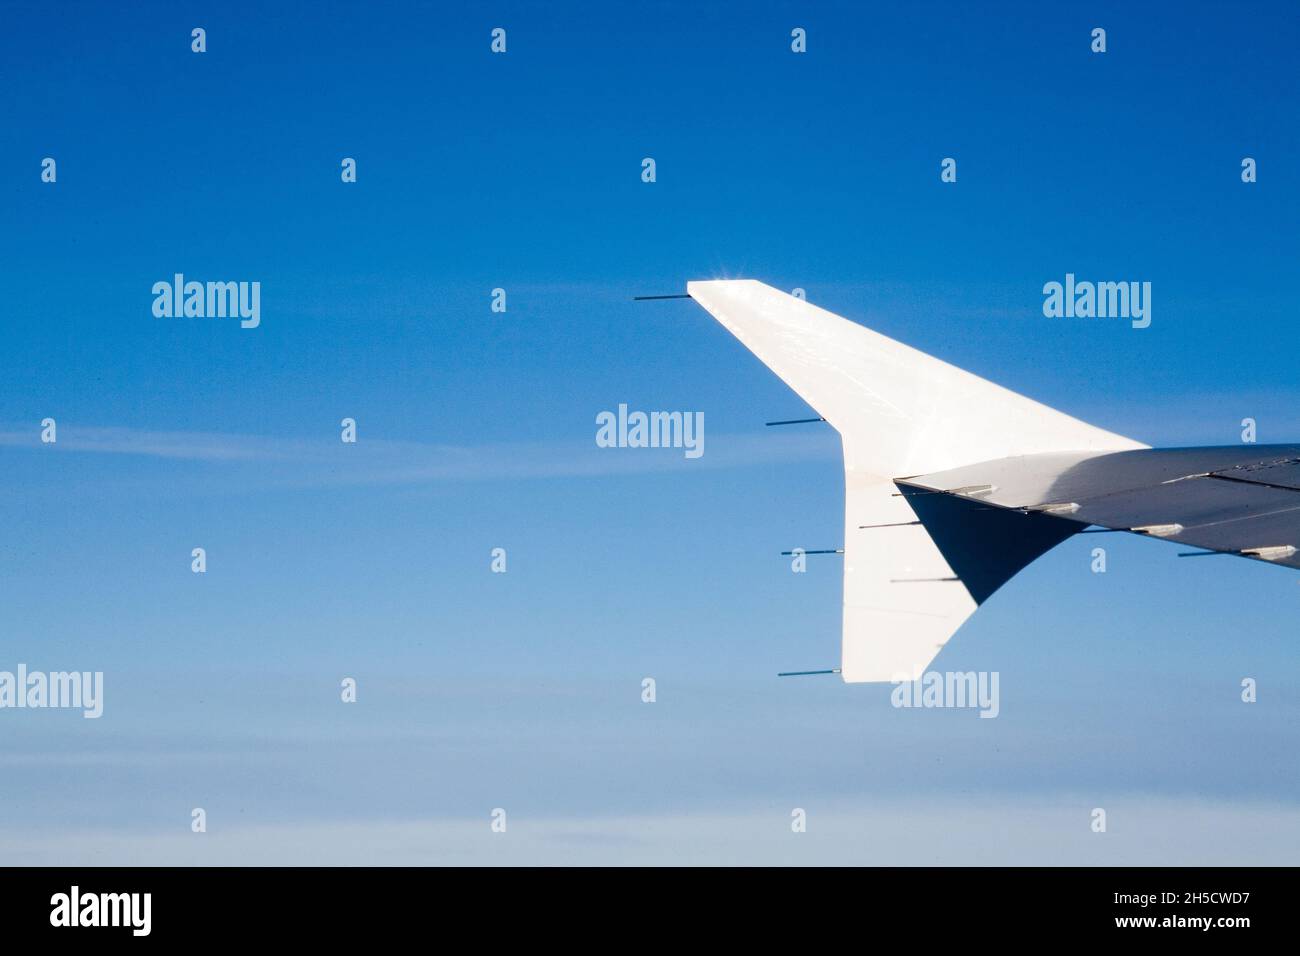 airfoil, rear view Stock Photo